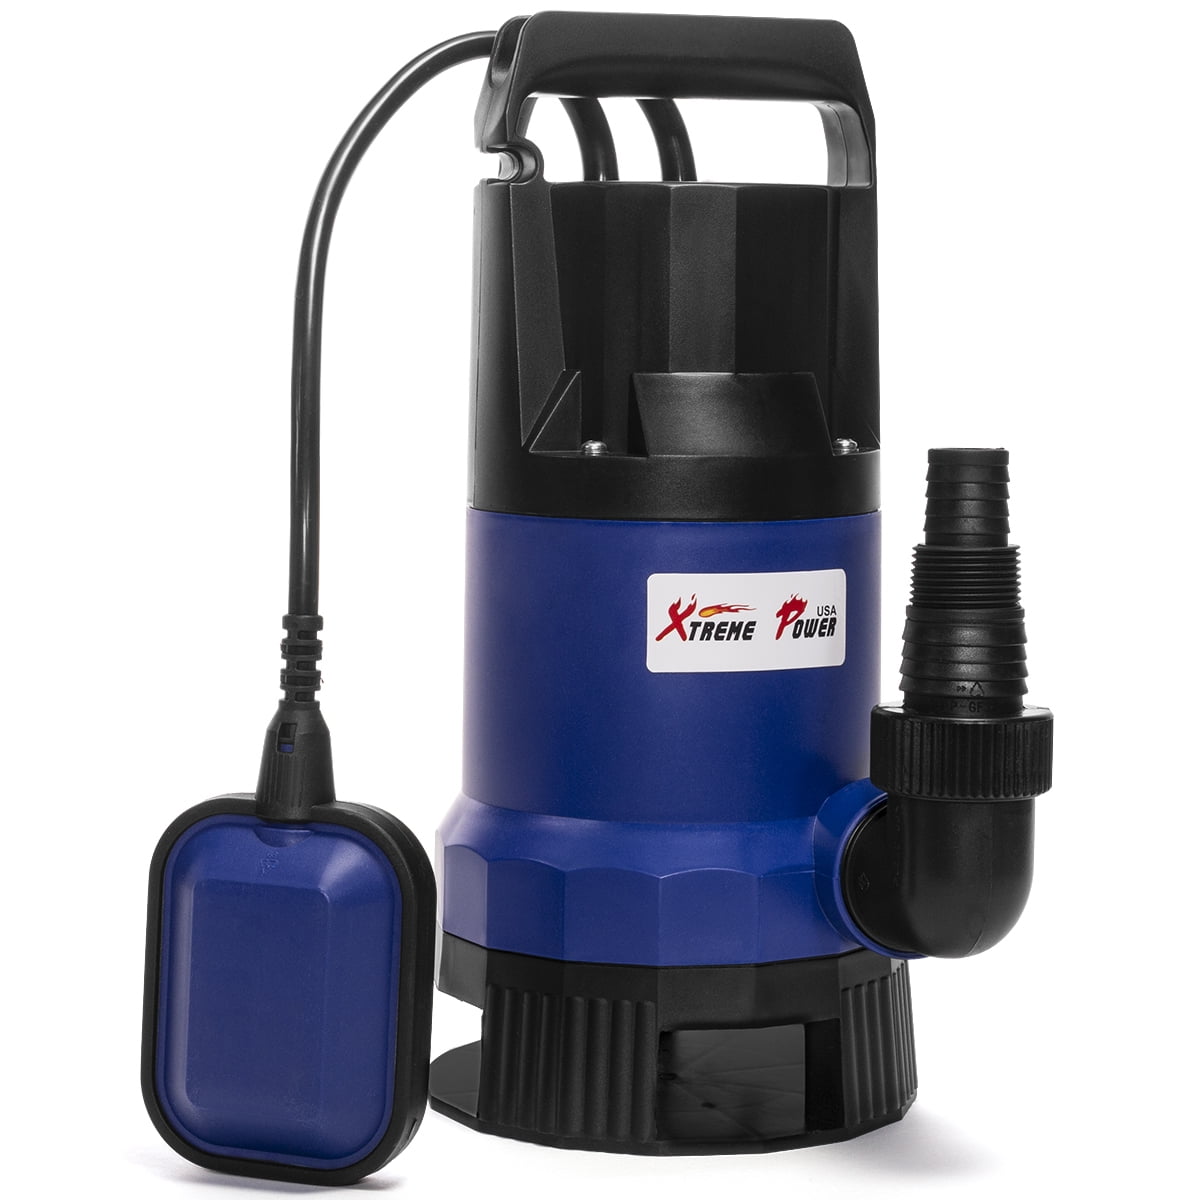 Electric Submersible Clean or Dirty Water Pump for Flood Pool Garden Well Pond 